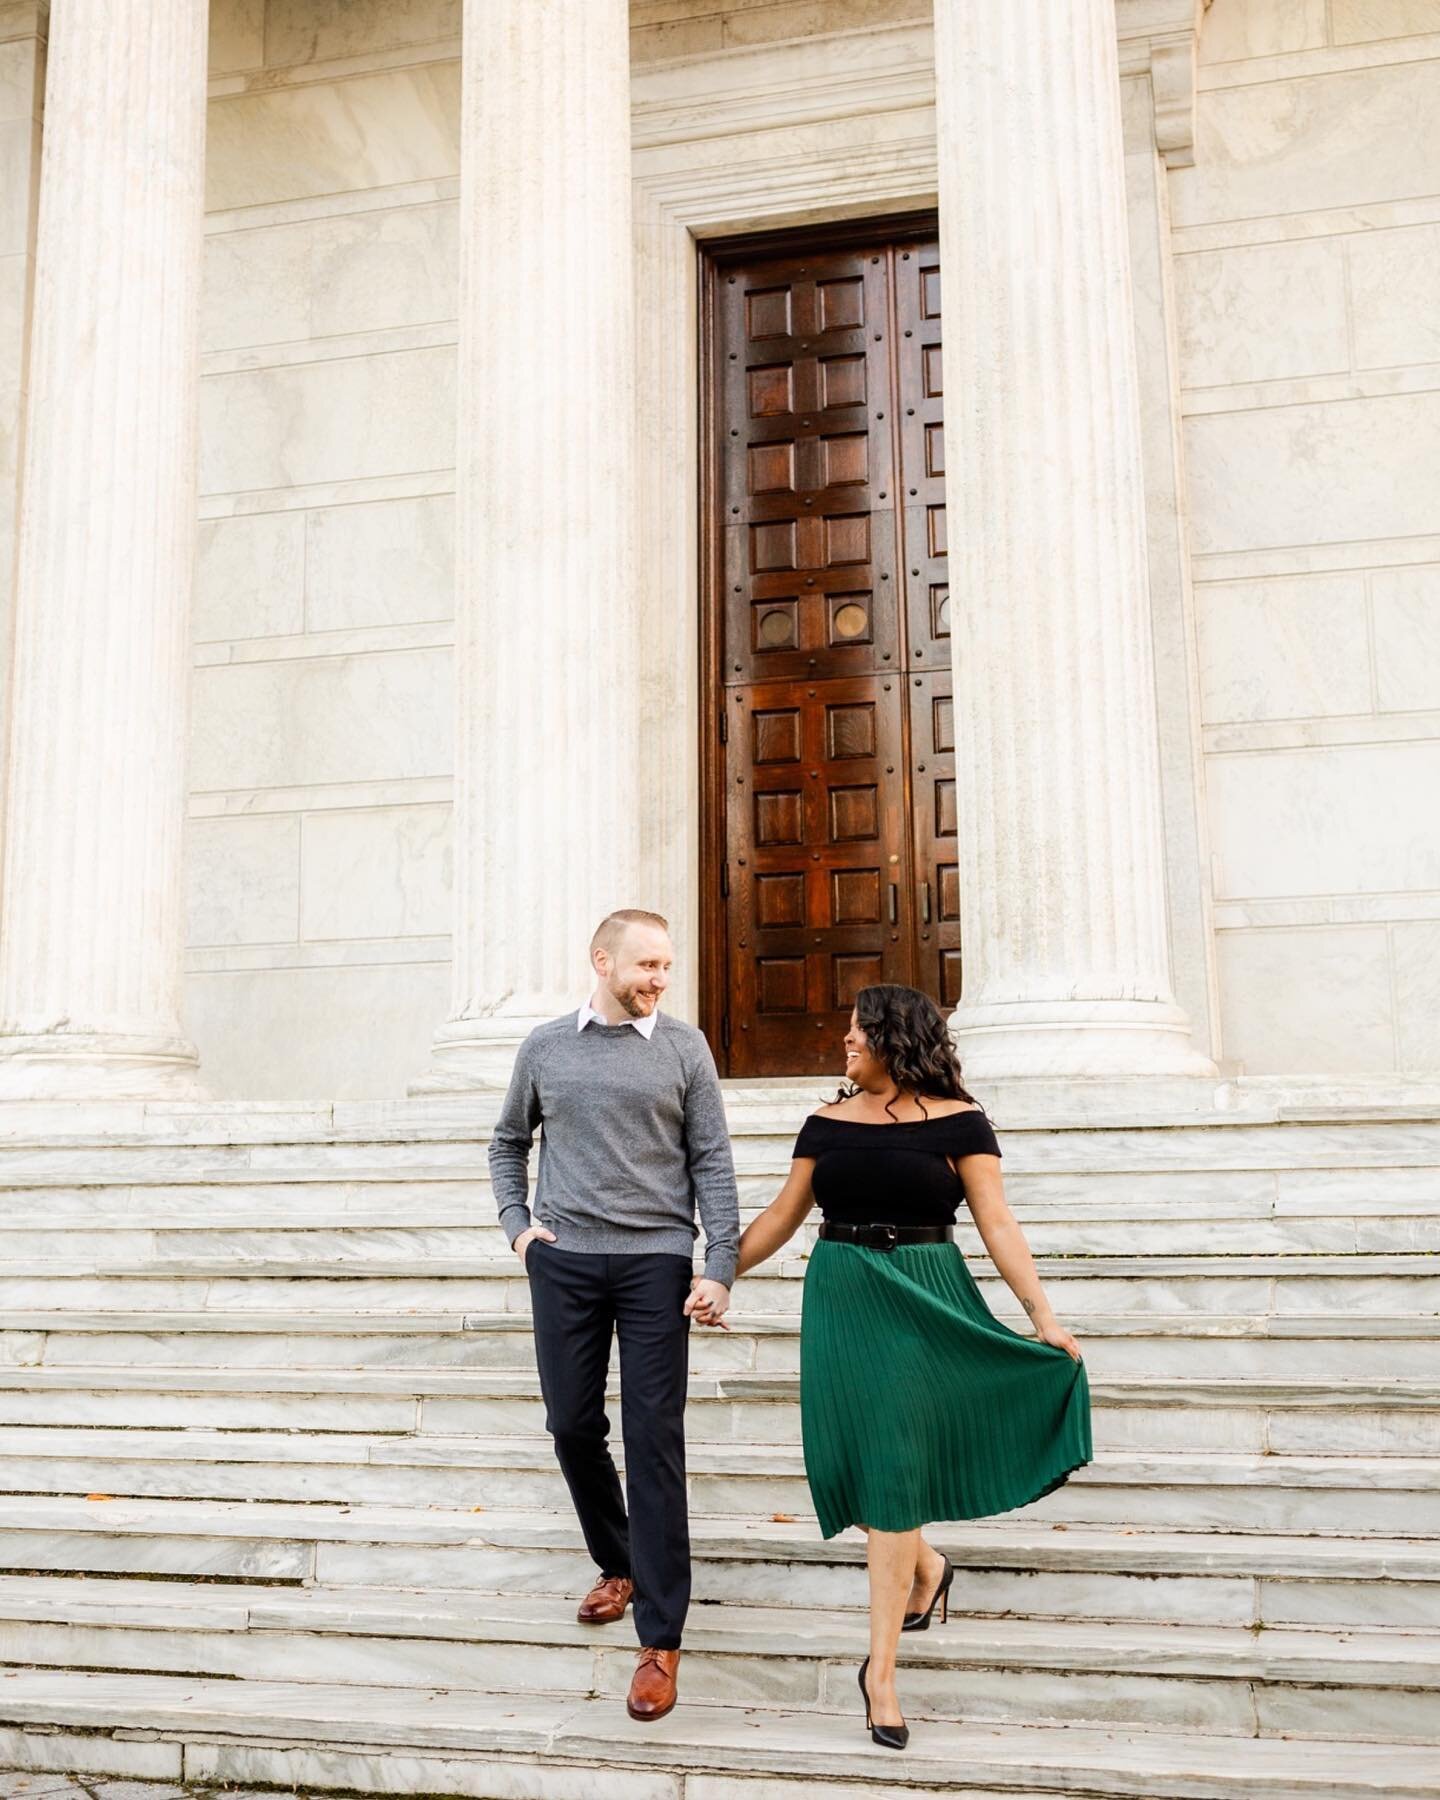 Cynthia and Daniel are engaged! A perfect evening spent sipping on coffee, exploring Princeton&rsquo;s beautiful campus, and - best of all - capturing these two in their laughter and love! 

Thank you for such a fun filled evening, you two! Cannot wa